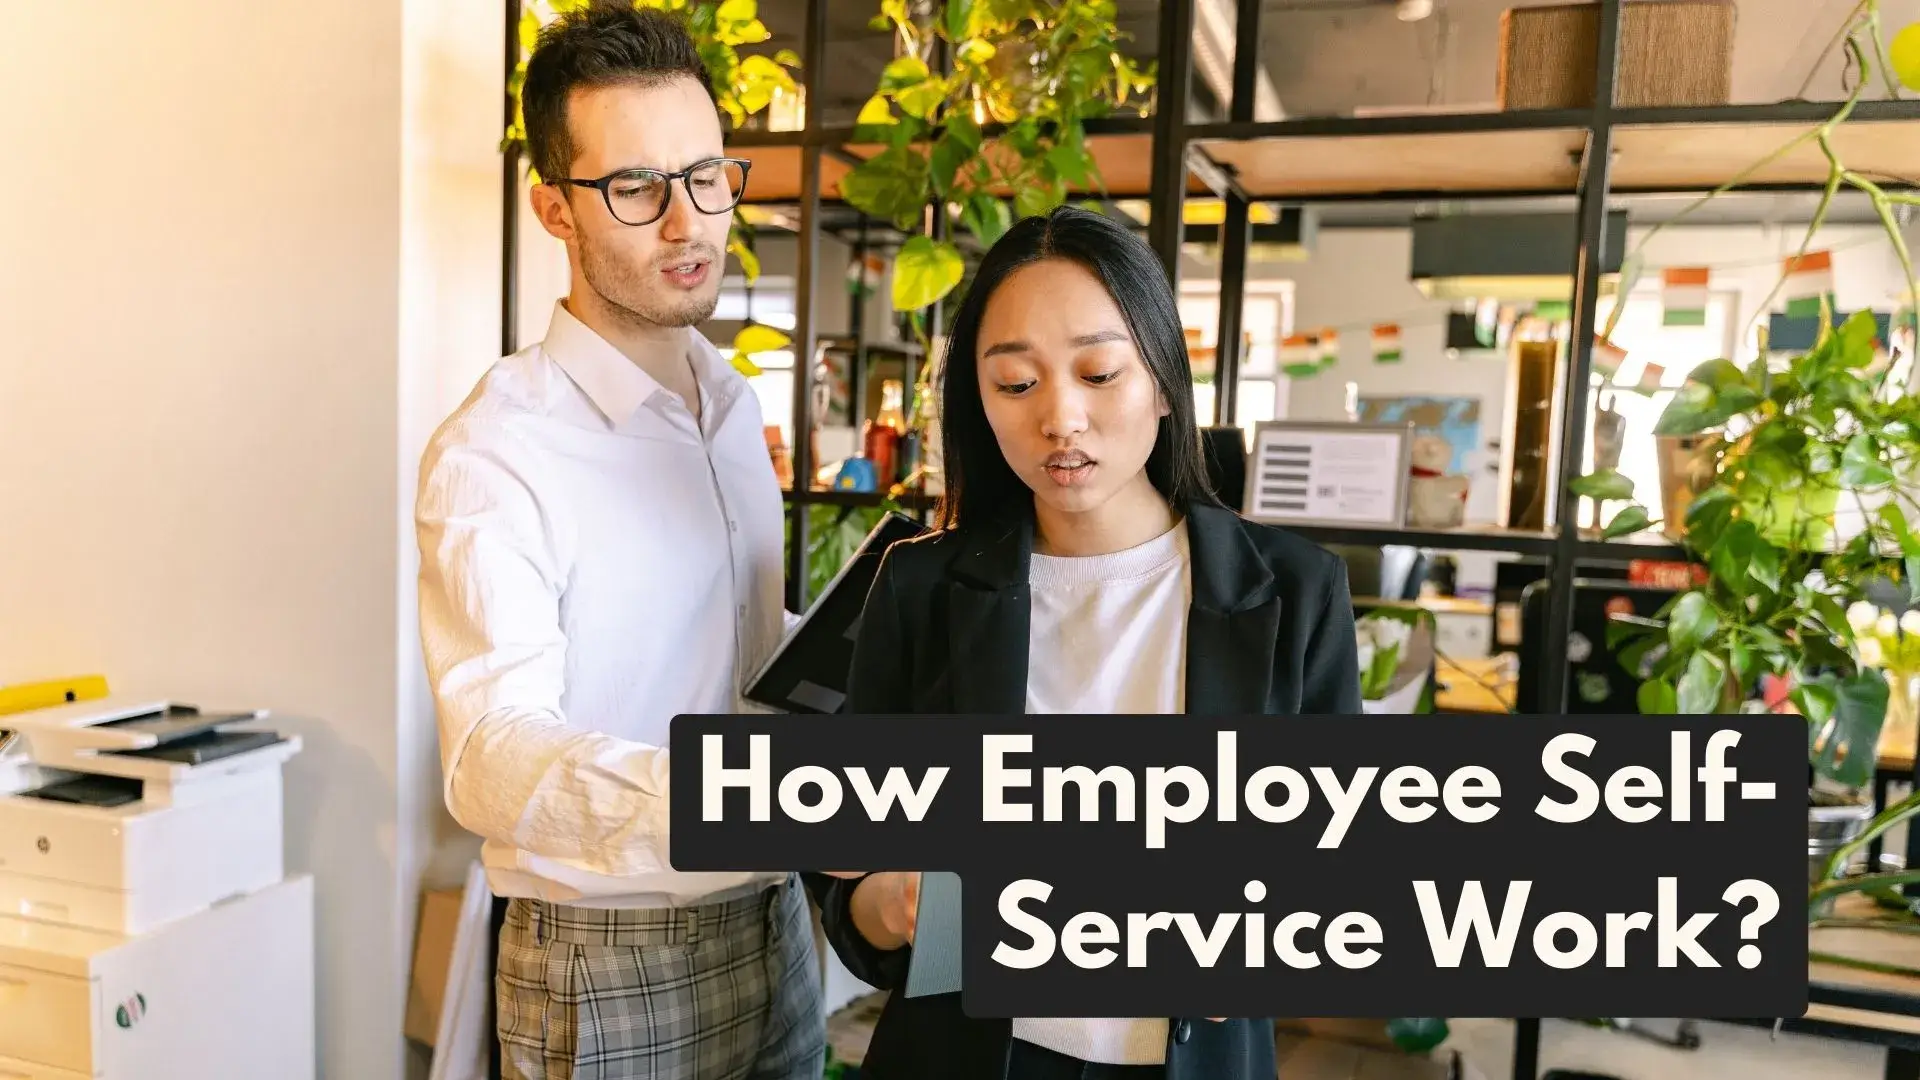 How Employee Self-Service Work With Case Studies?